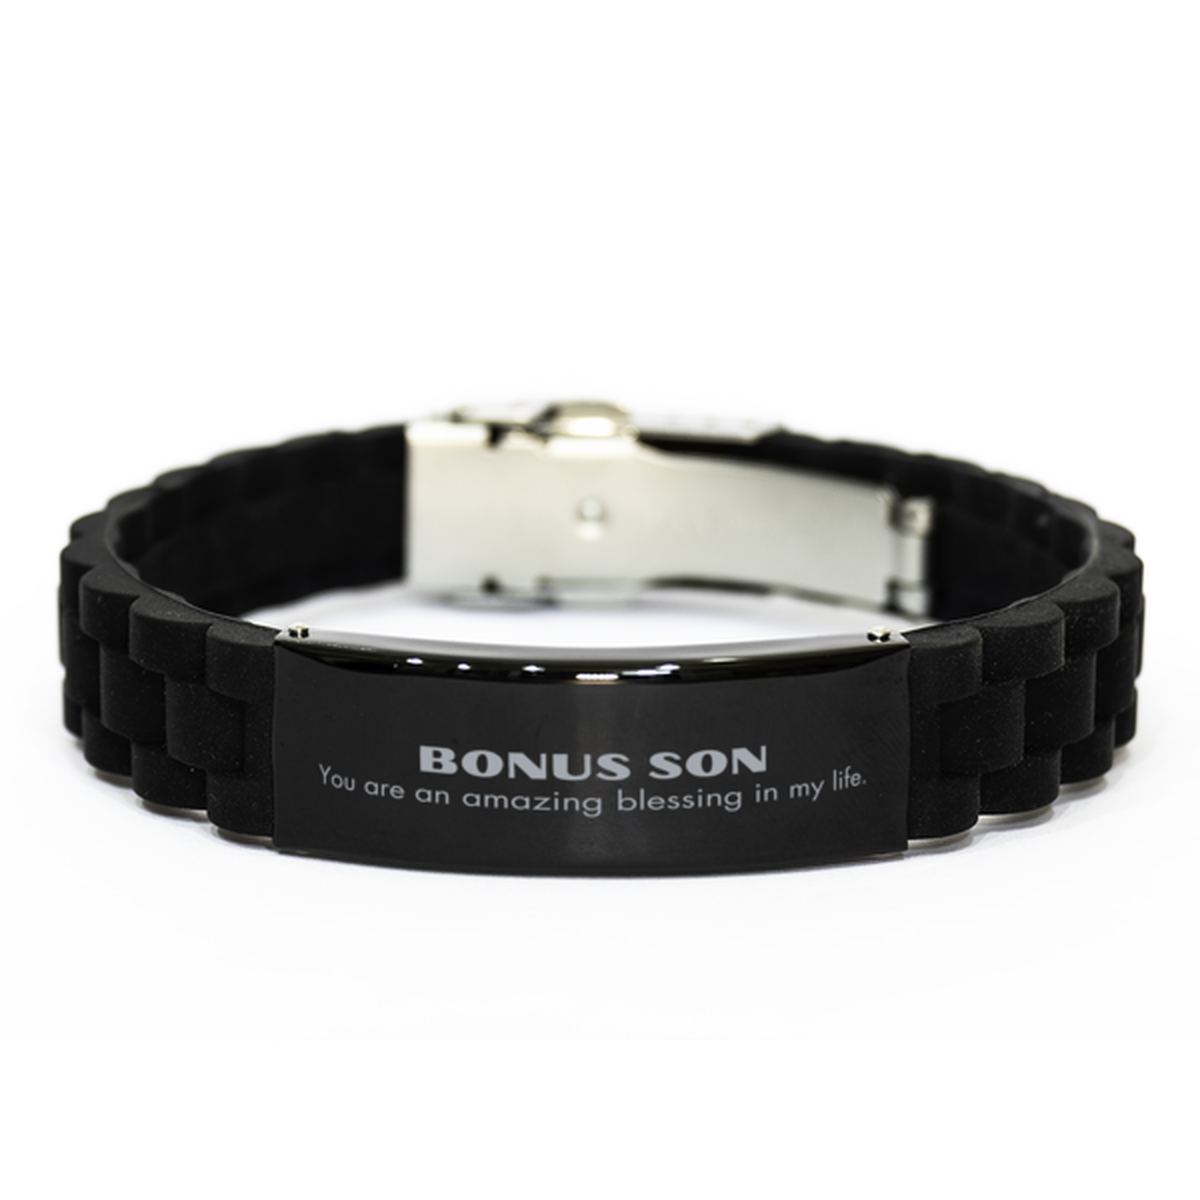 Bonus Son Black Glidelock Clasp Bracelet, You are an amazing blessing in my life, Thank You Gifts For Bonus Son, Inspirational Birthday Christmas Unique Gifts For Bonus Son